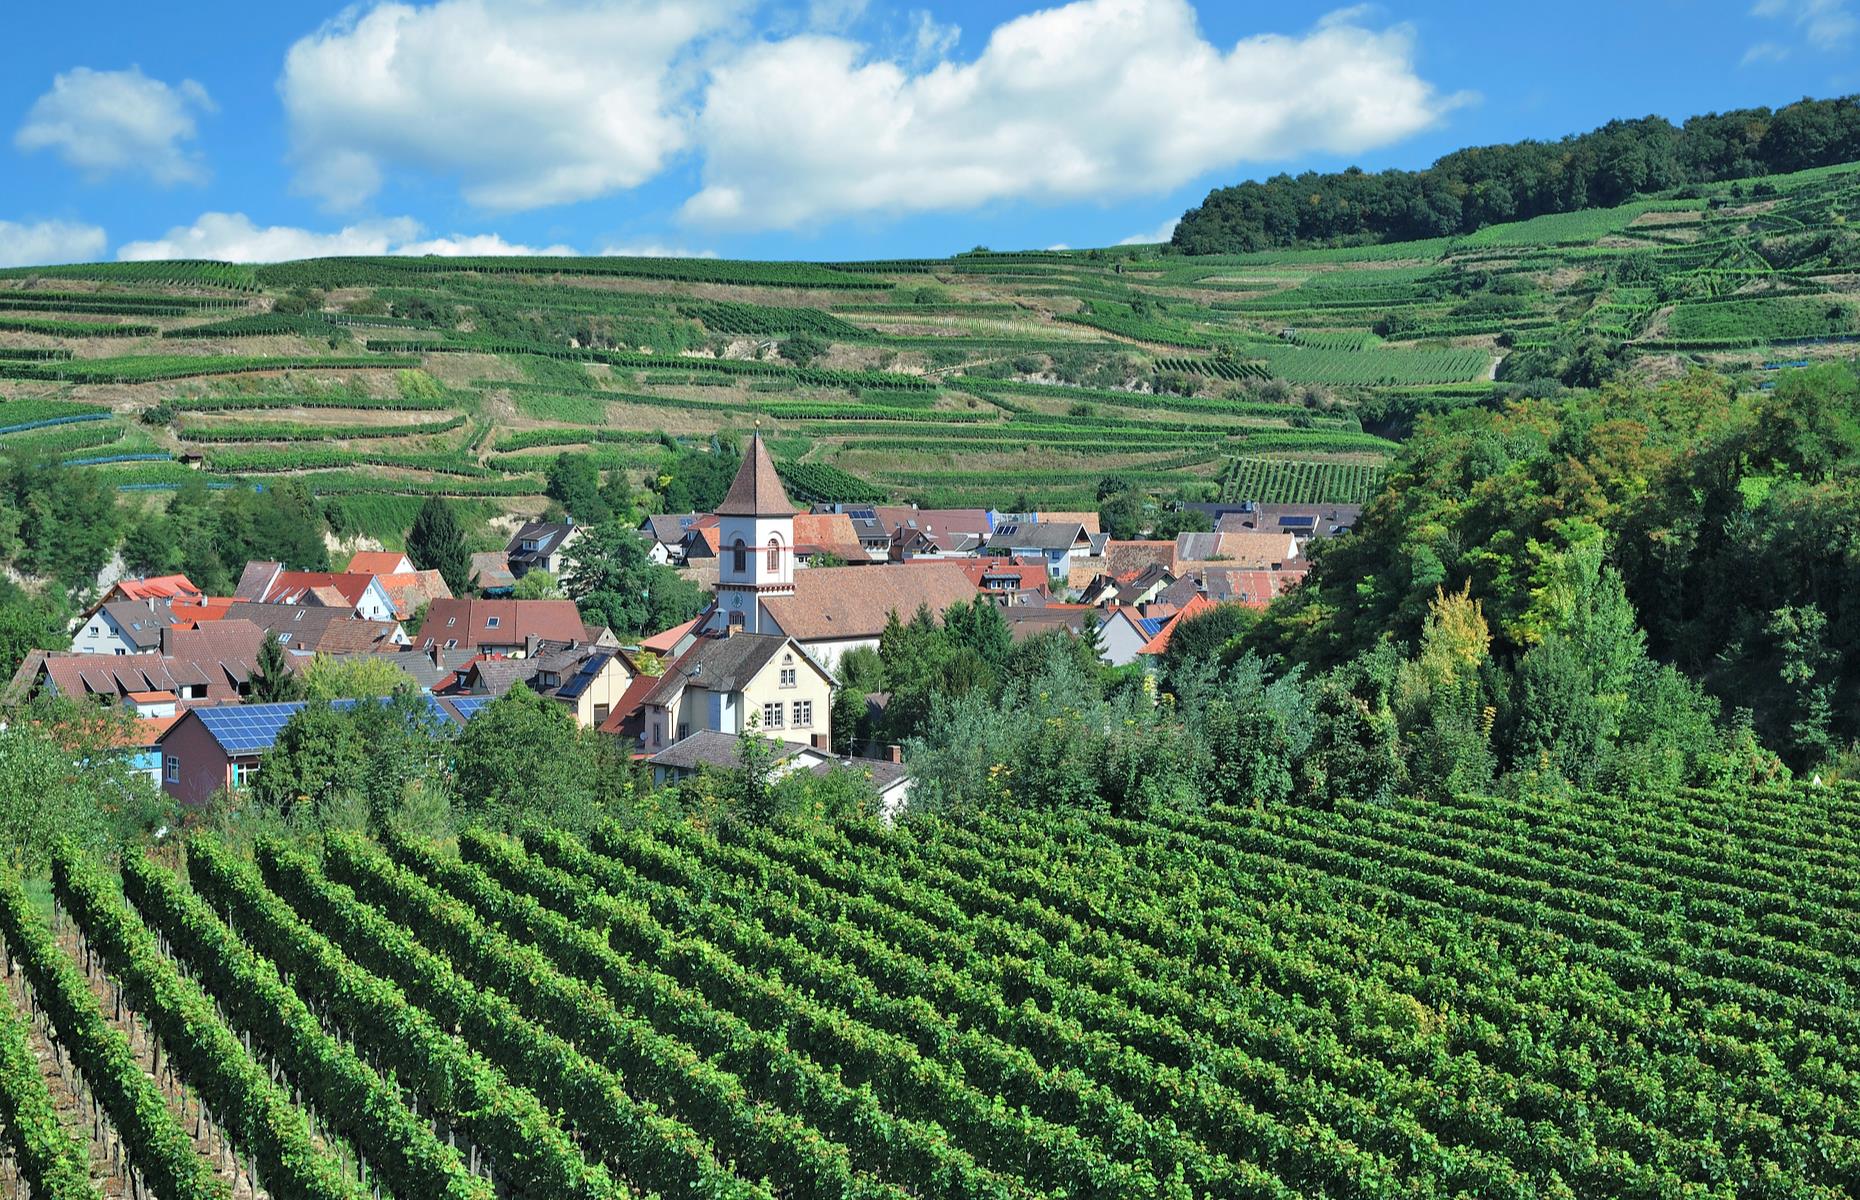 <p>This delightful route delves into parts of the ever-popular <a href="https://www.badische-weinstrasse.de/">Baden Wine Route</a>, while also devouring portions of the Black Forest. Covering around 175 miles (282km), the journey out from Stuttgart weaves through wine-growing villages on the edge of the Black Forest while also taking in vineyards in the foothills of the Upper Rhine Valley. The elegant spa town of Baden Baden and the Kaiserstuhl wine region (pictured) are among the string of scenic highlights.</p>